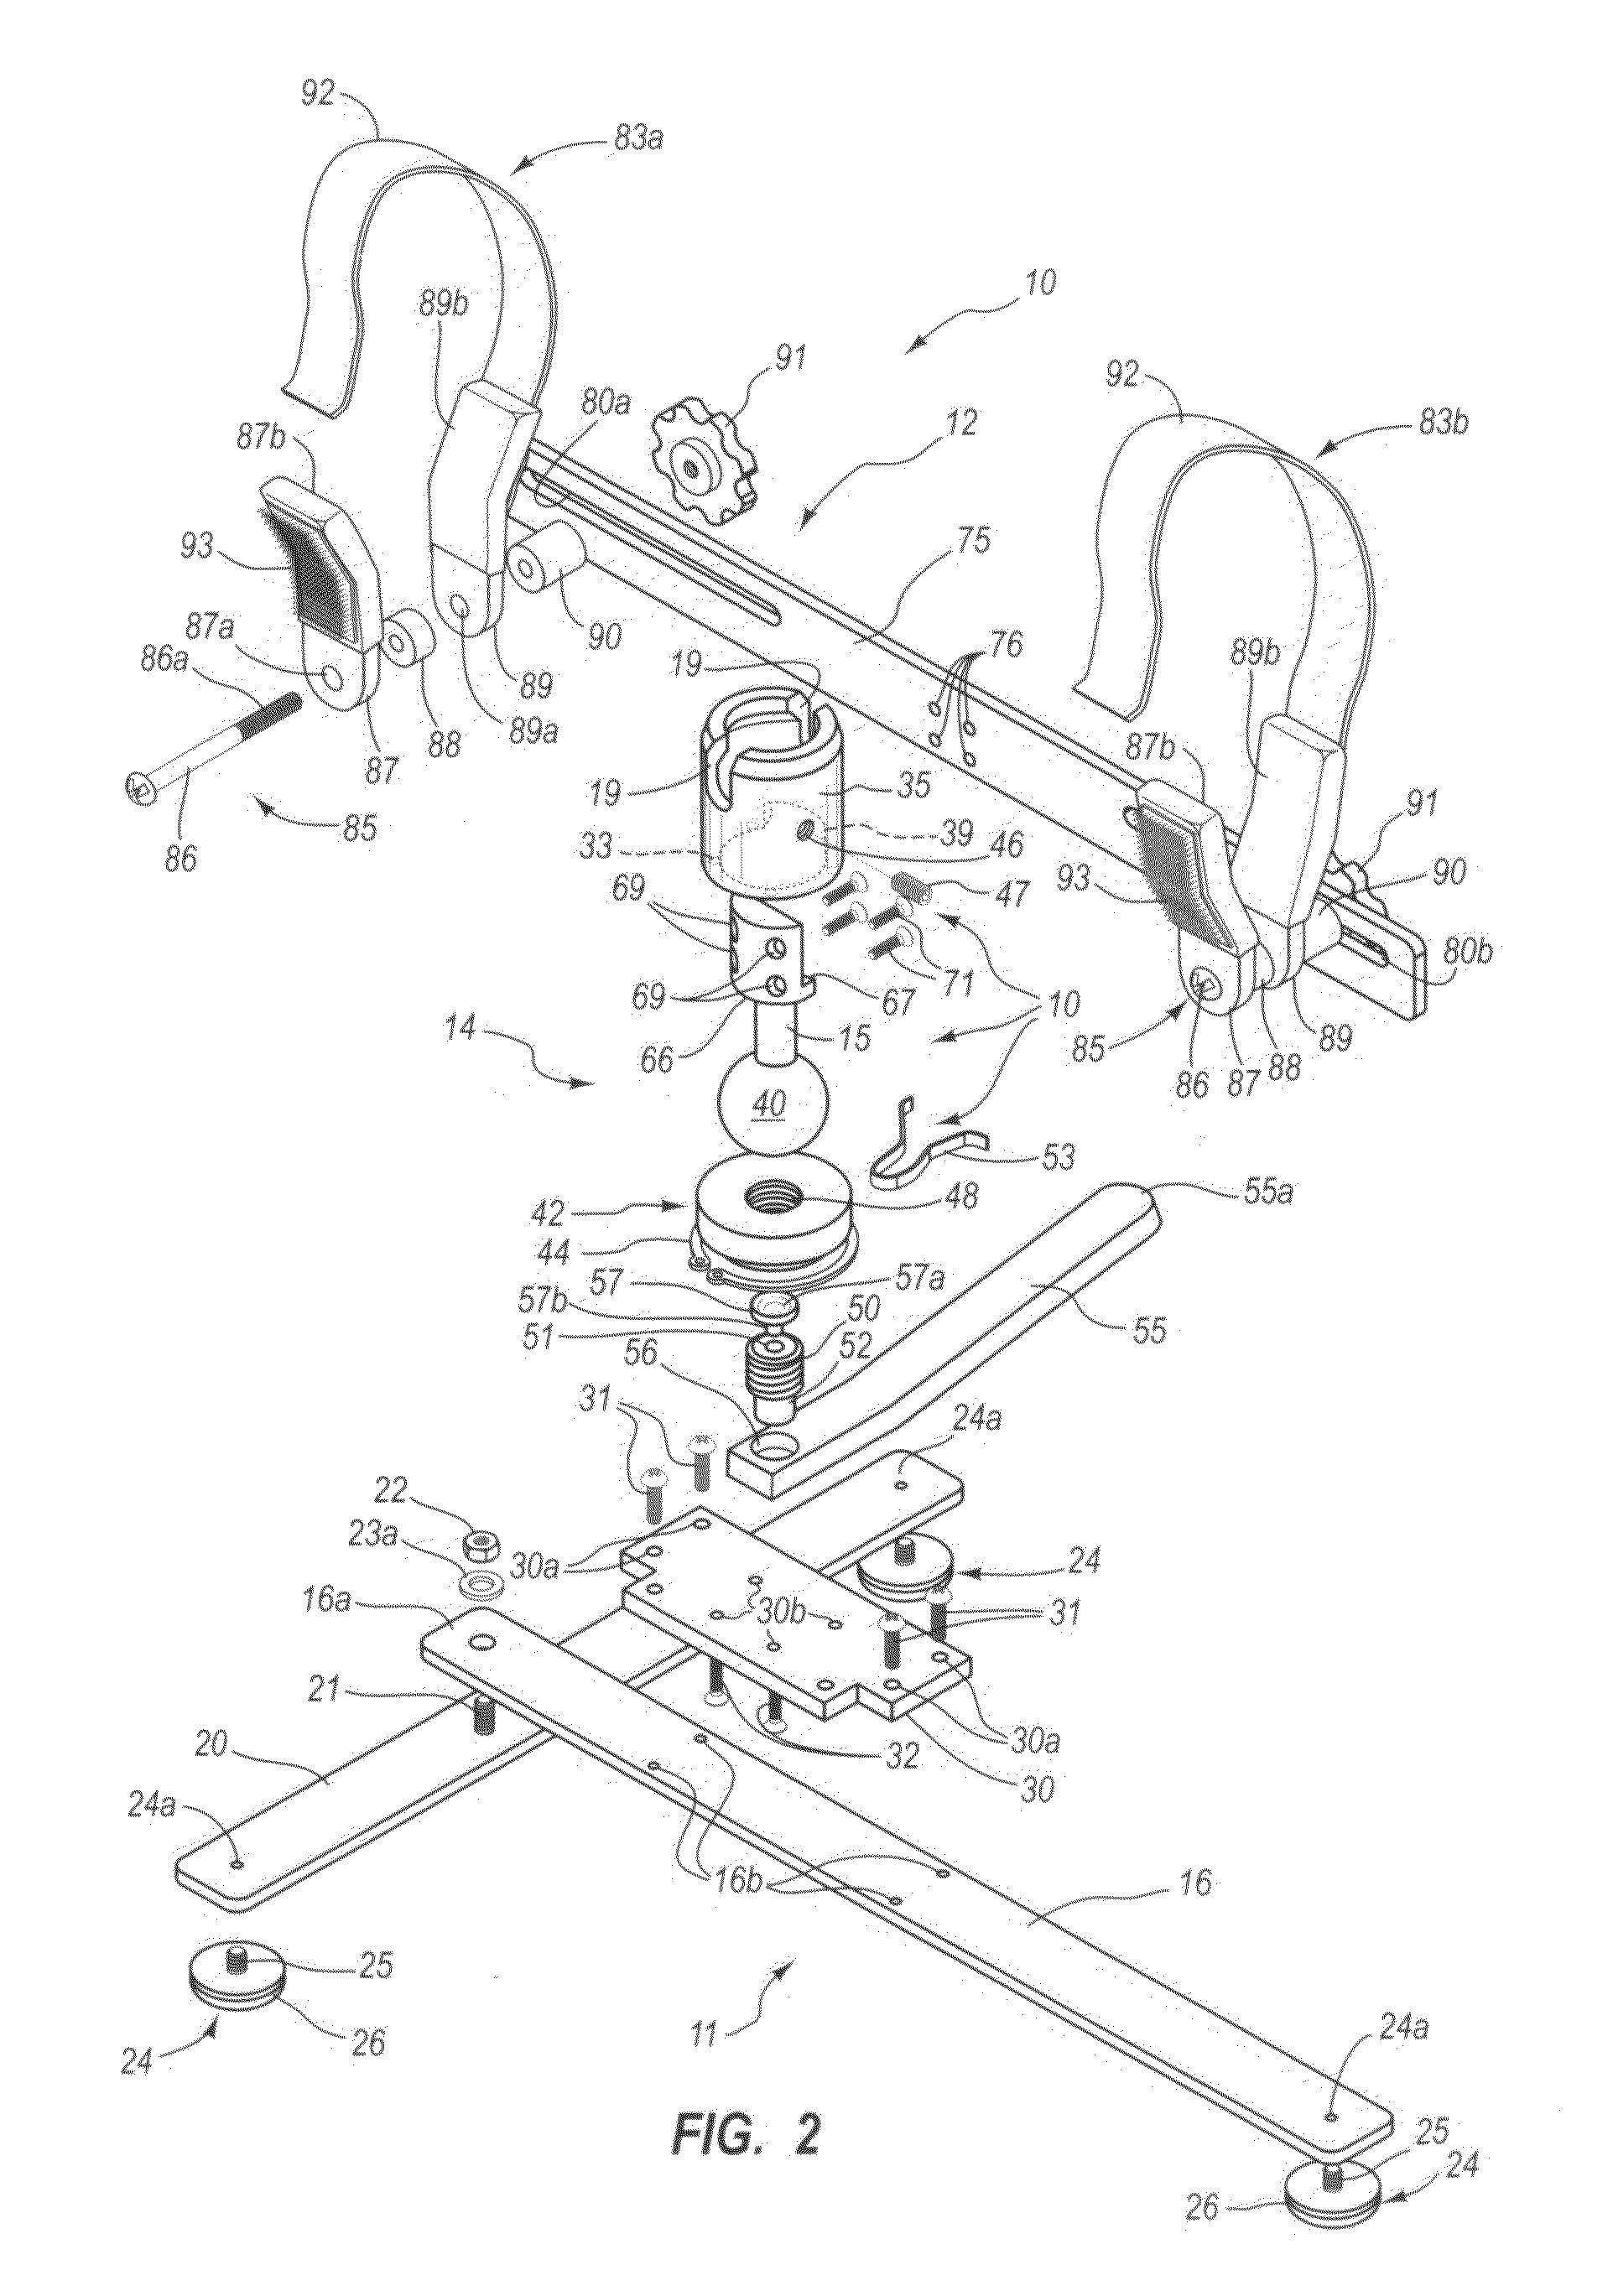 Multipurpose ball joint assembly and work holding devices